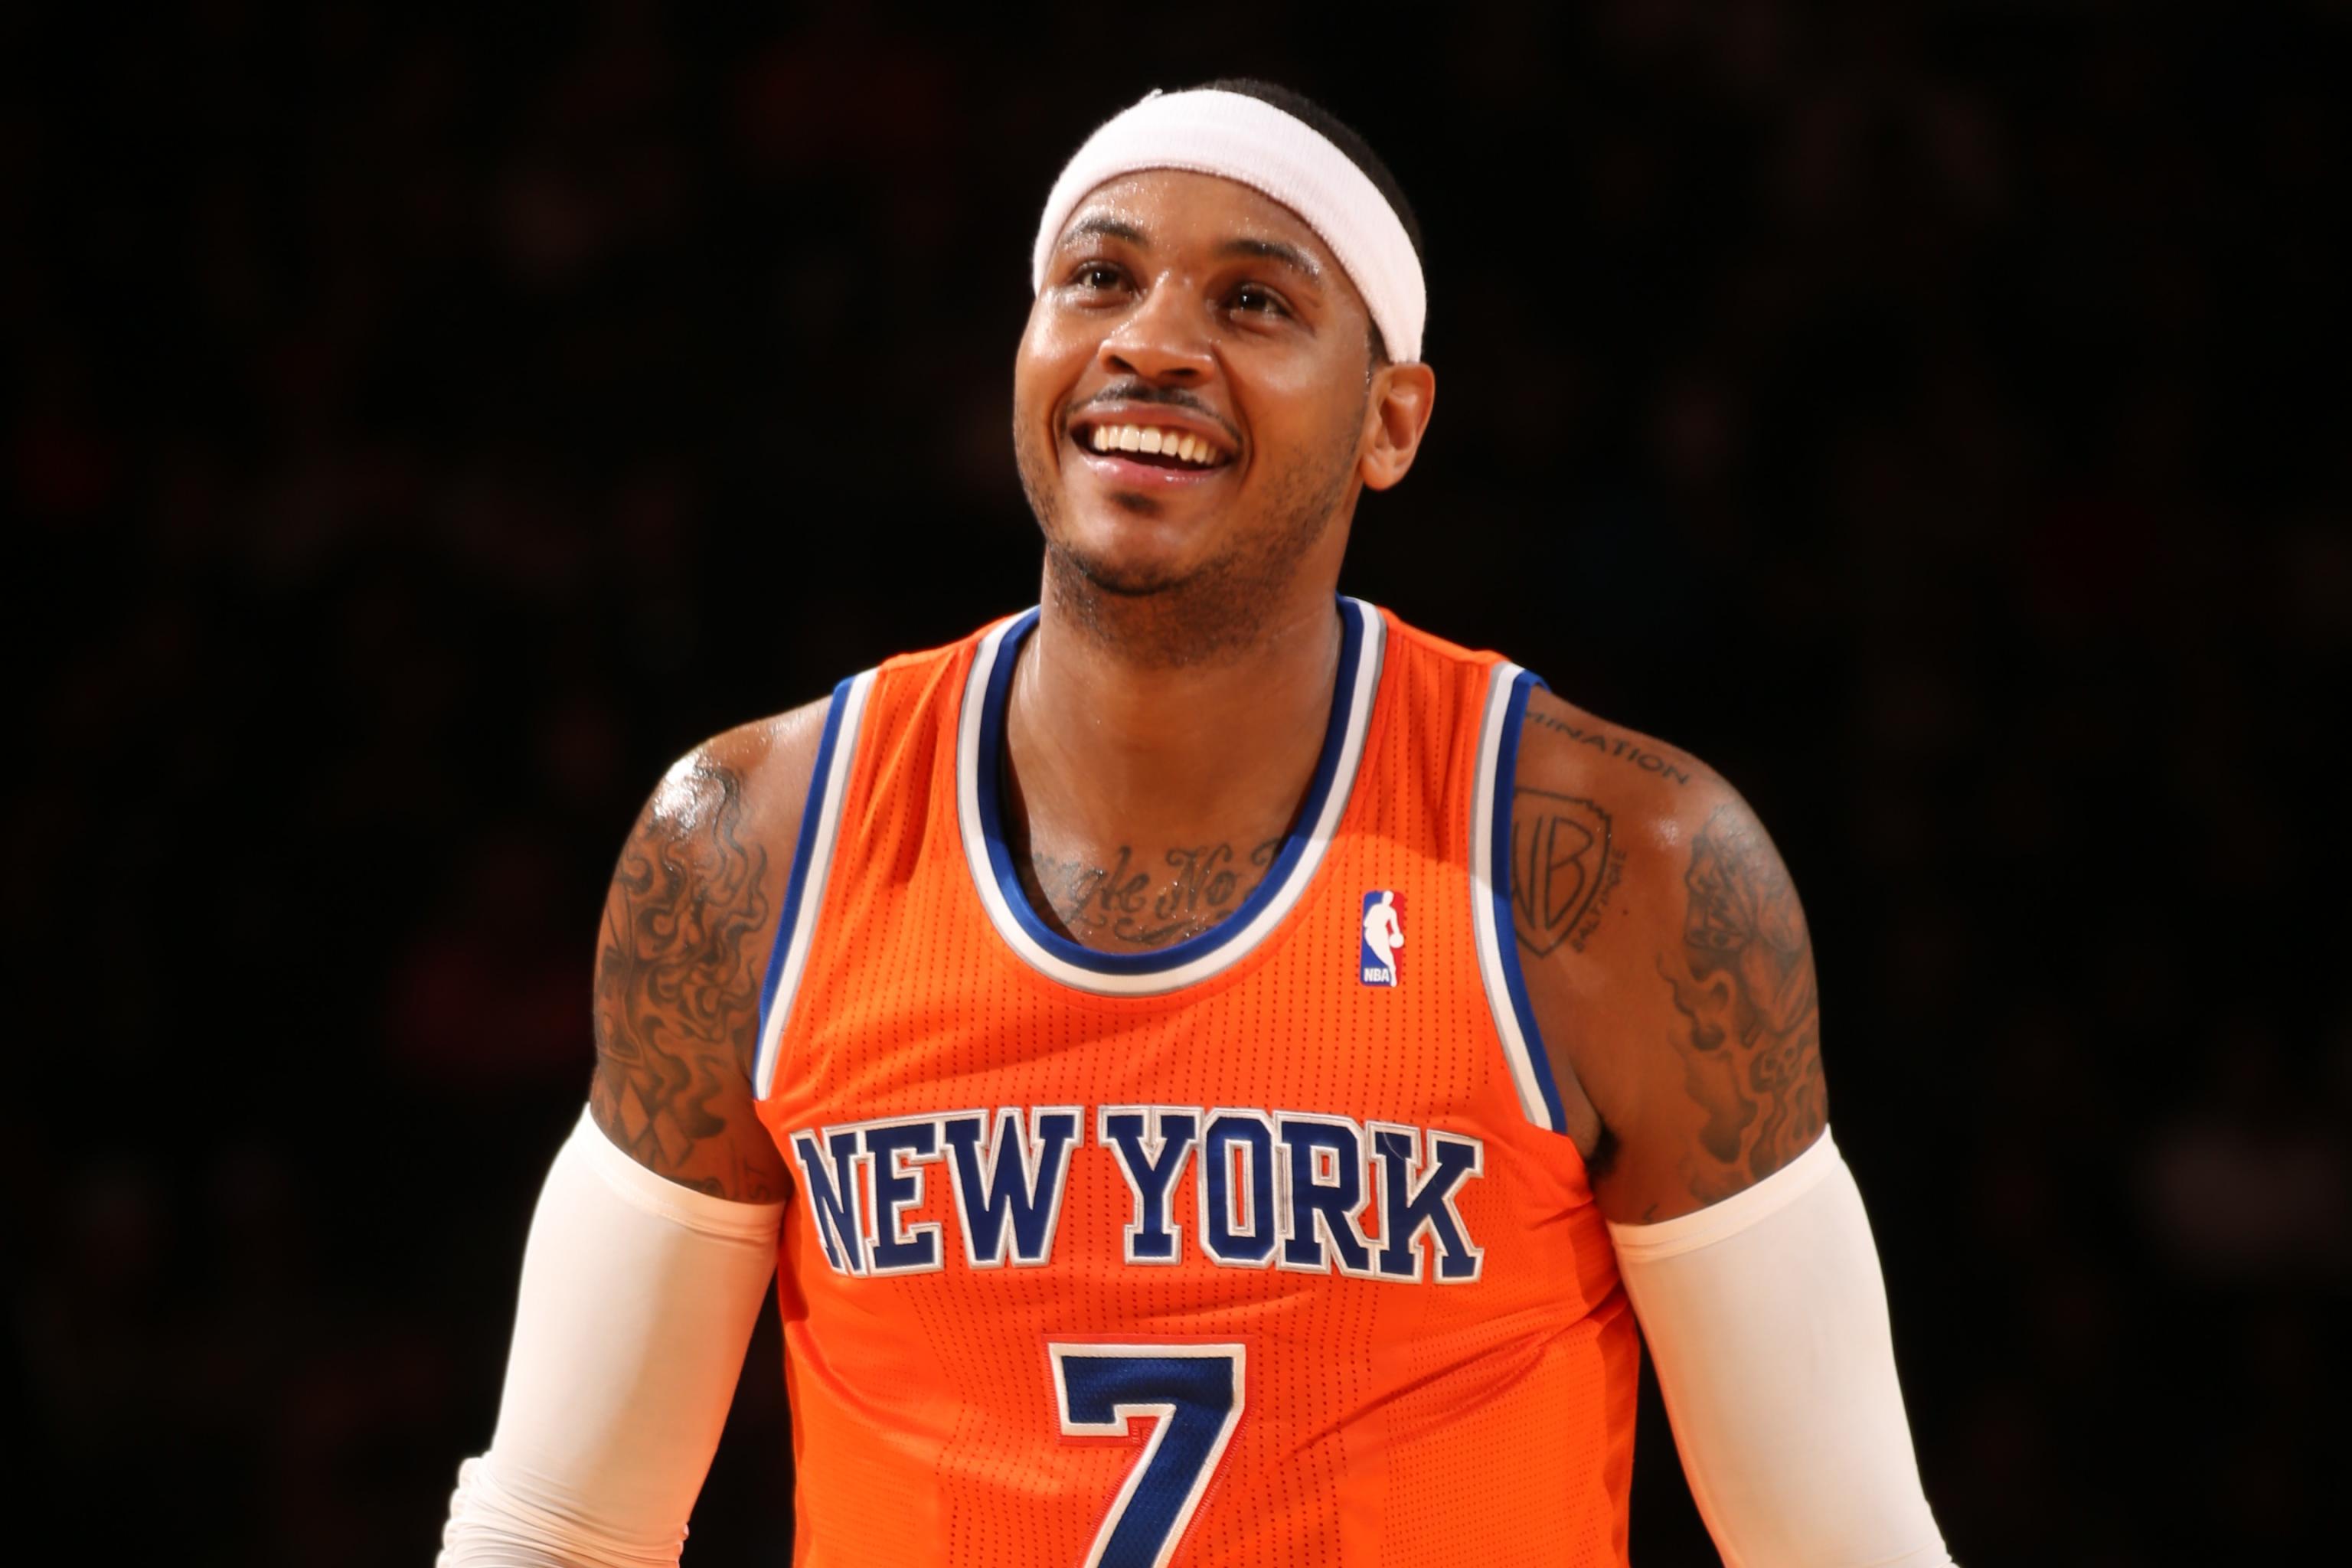 Charitybuzz: Take Home a Signed Carmelo Anthony Knicks Jersey and